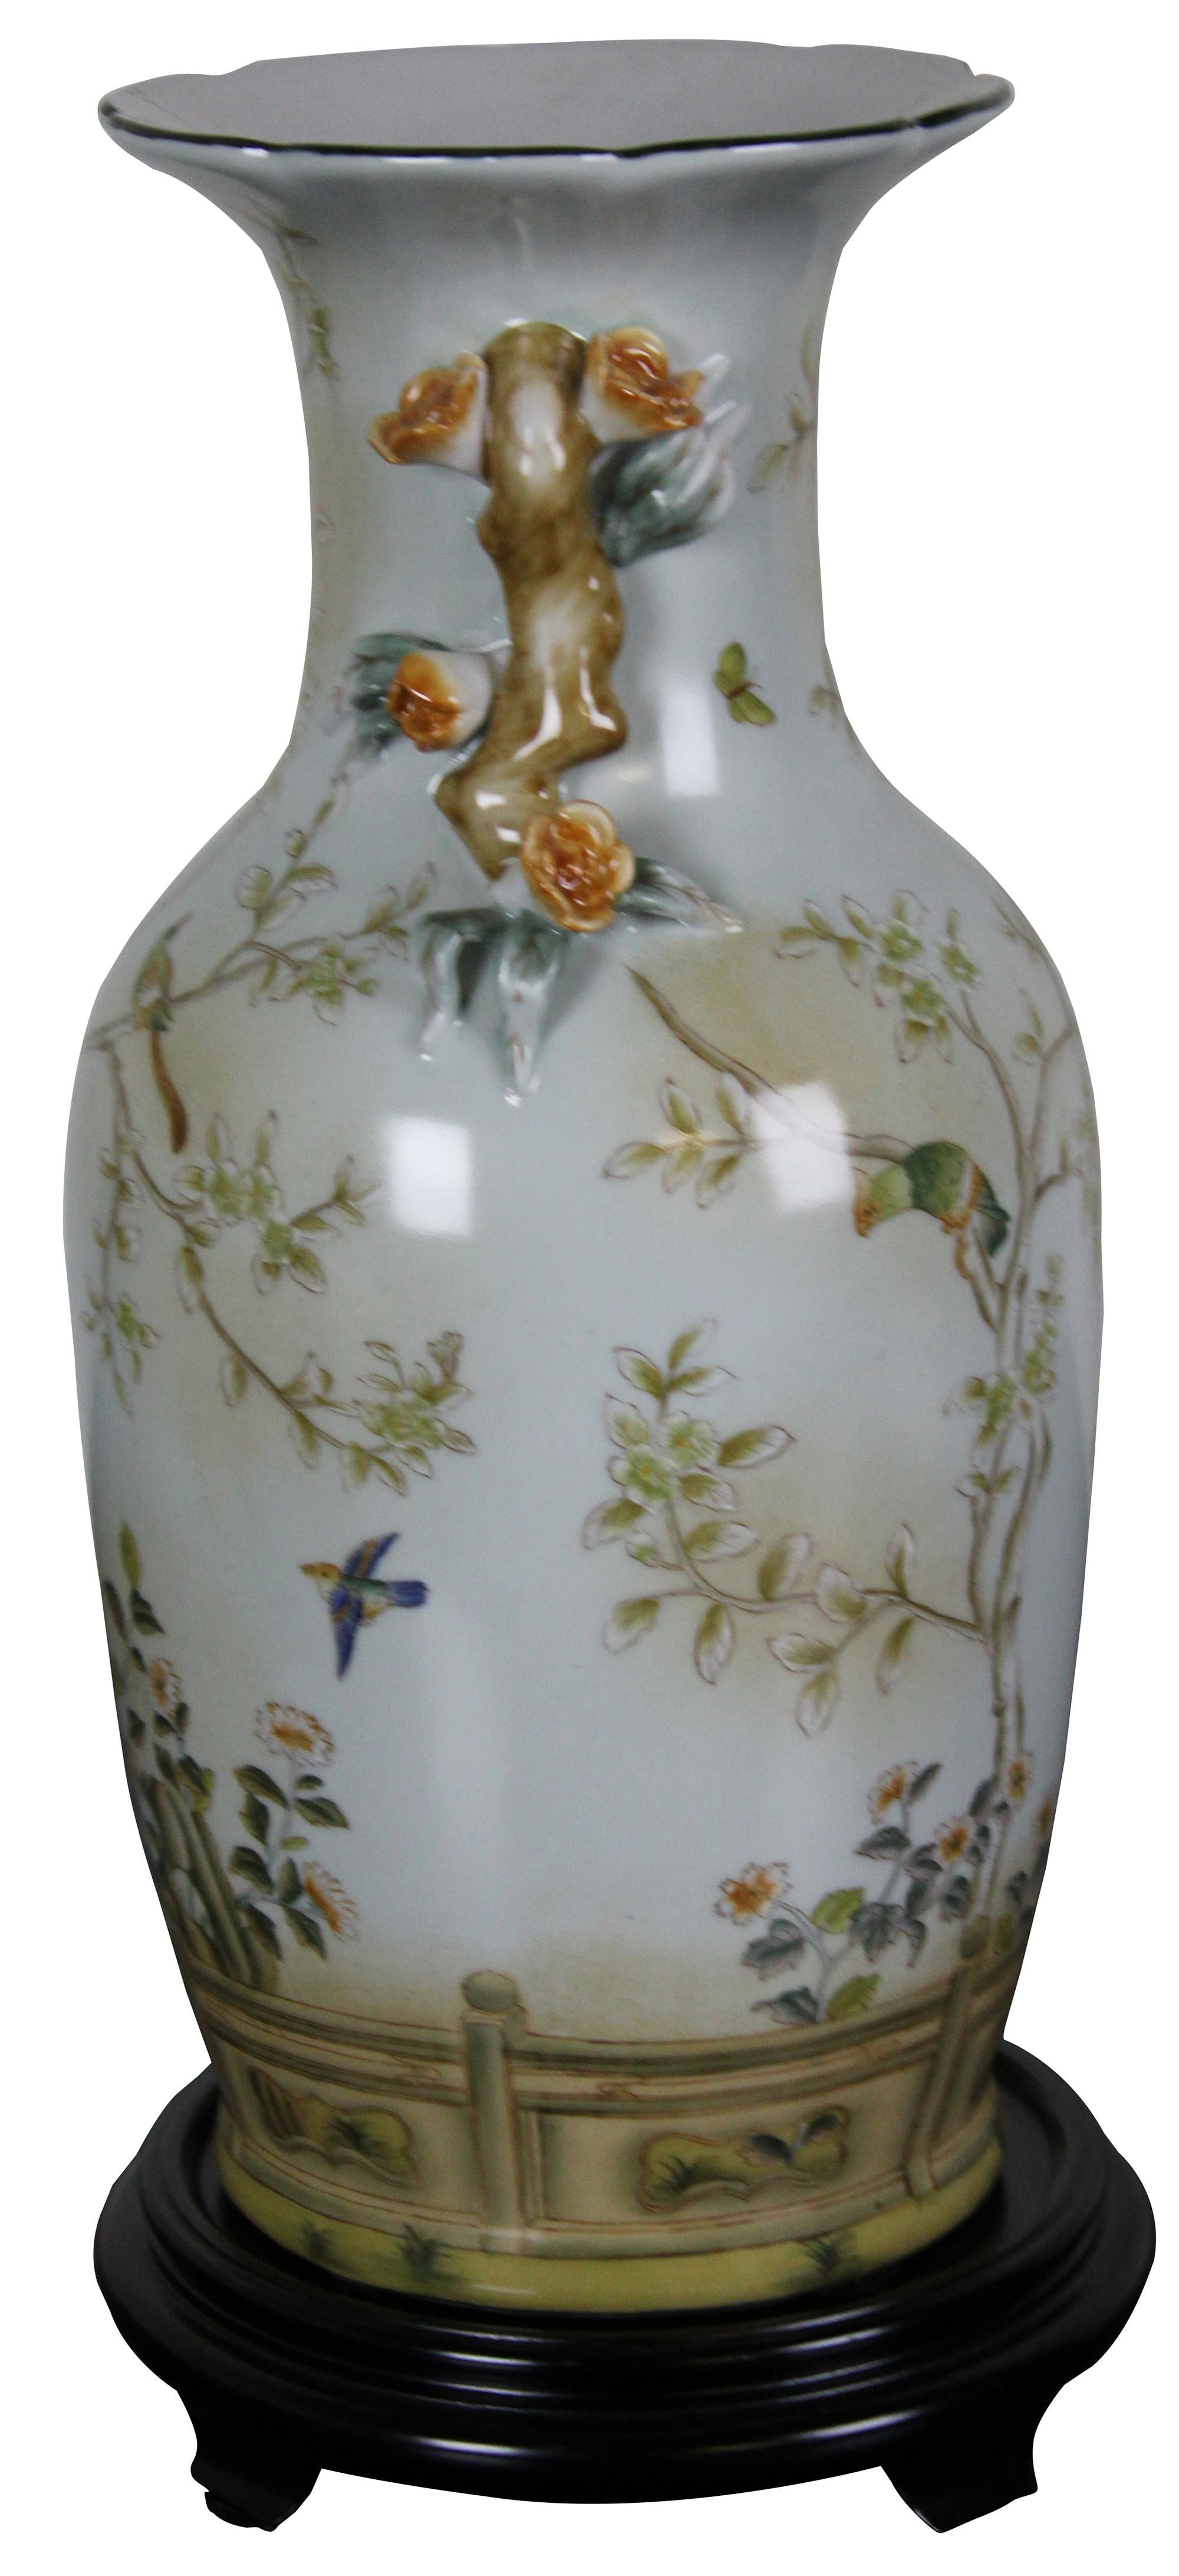 Vintage hand painted baluster form vase by Speer Collectibles. Features a floral motif with birds, butterflies, high relief and footed wood pedestal base.

Measures: Vase: 16